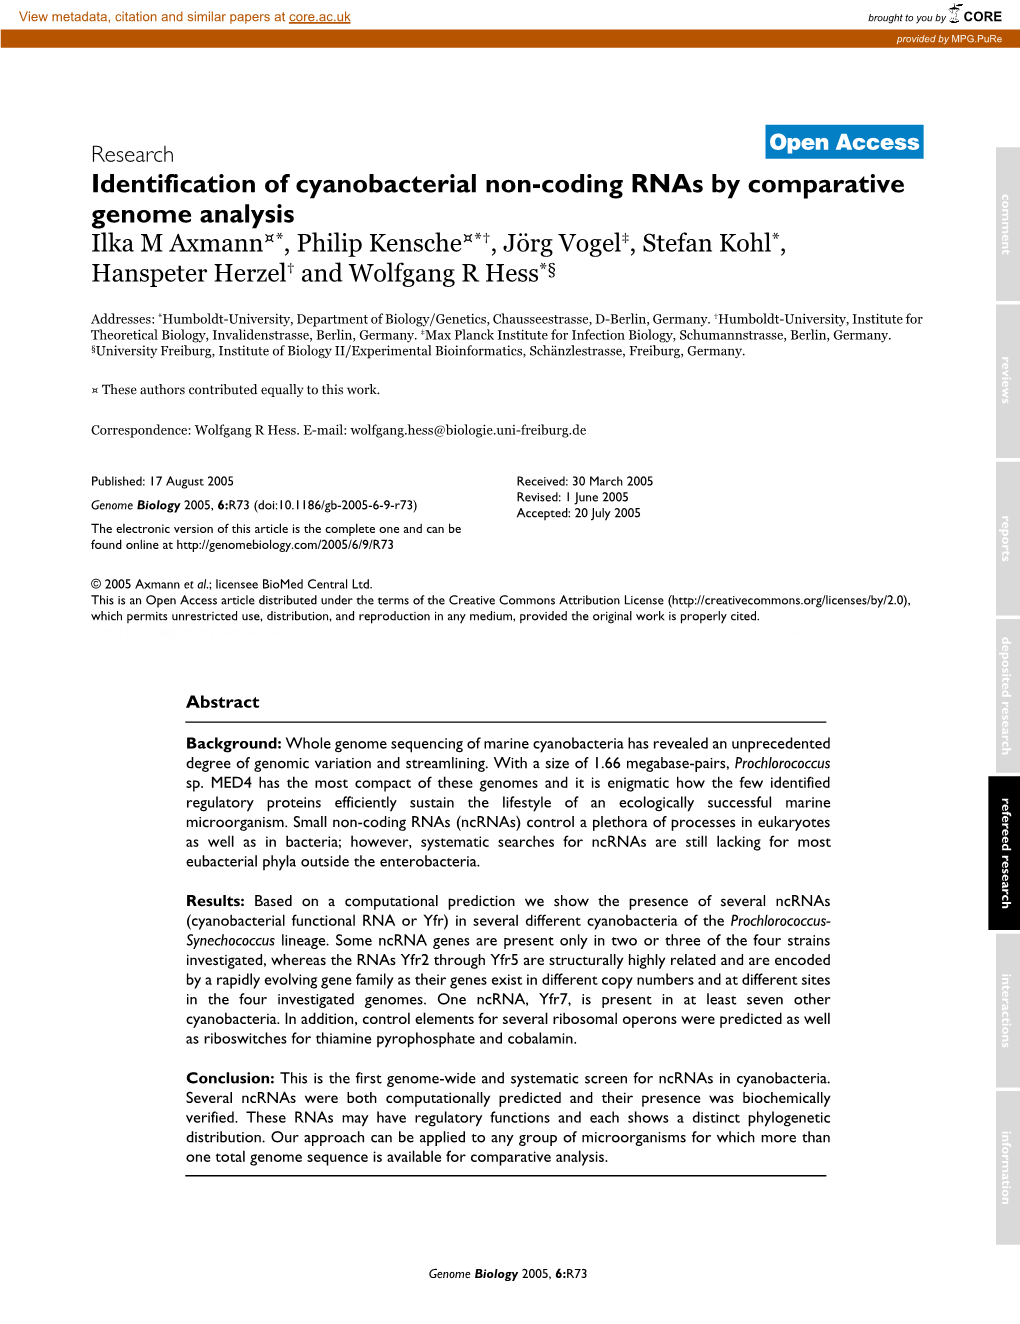 Identification of Cyanobacterial Non-Coding Rnas by Comparative